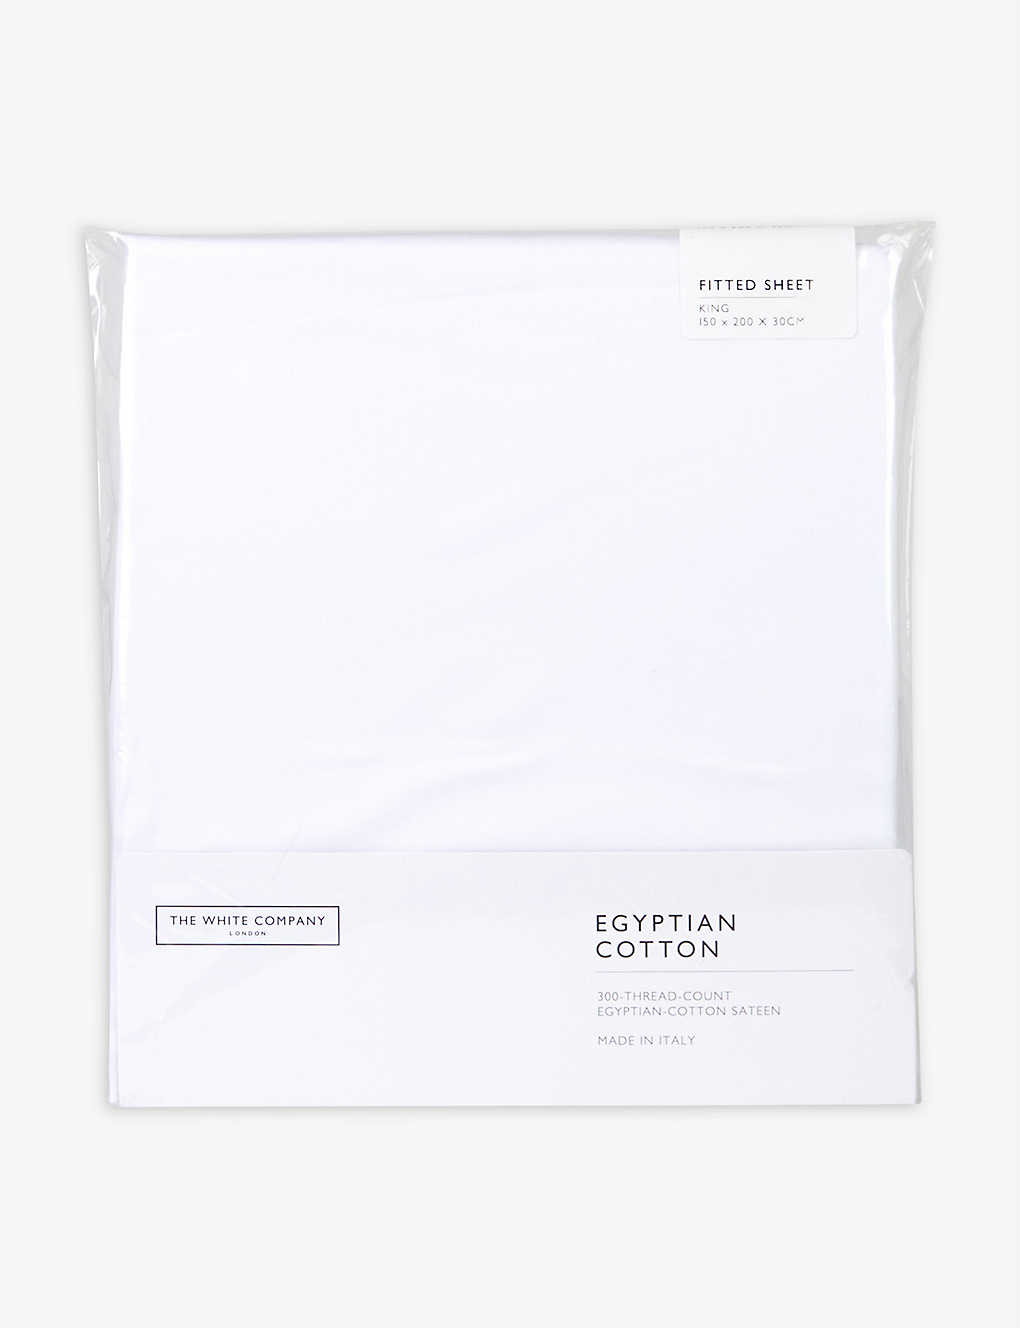 Single/ Double/ King/ Superking 200 Egyptian Cotton Fitted Sheet 